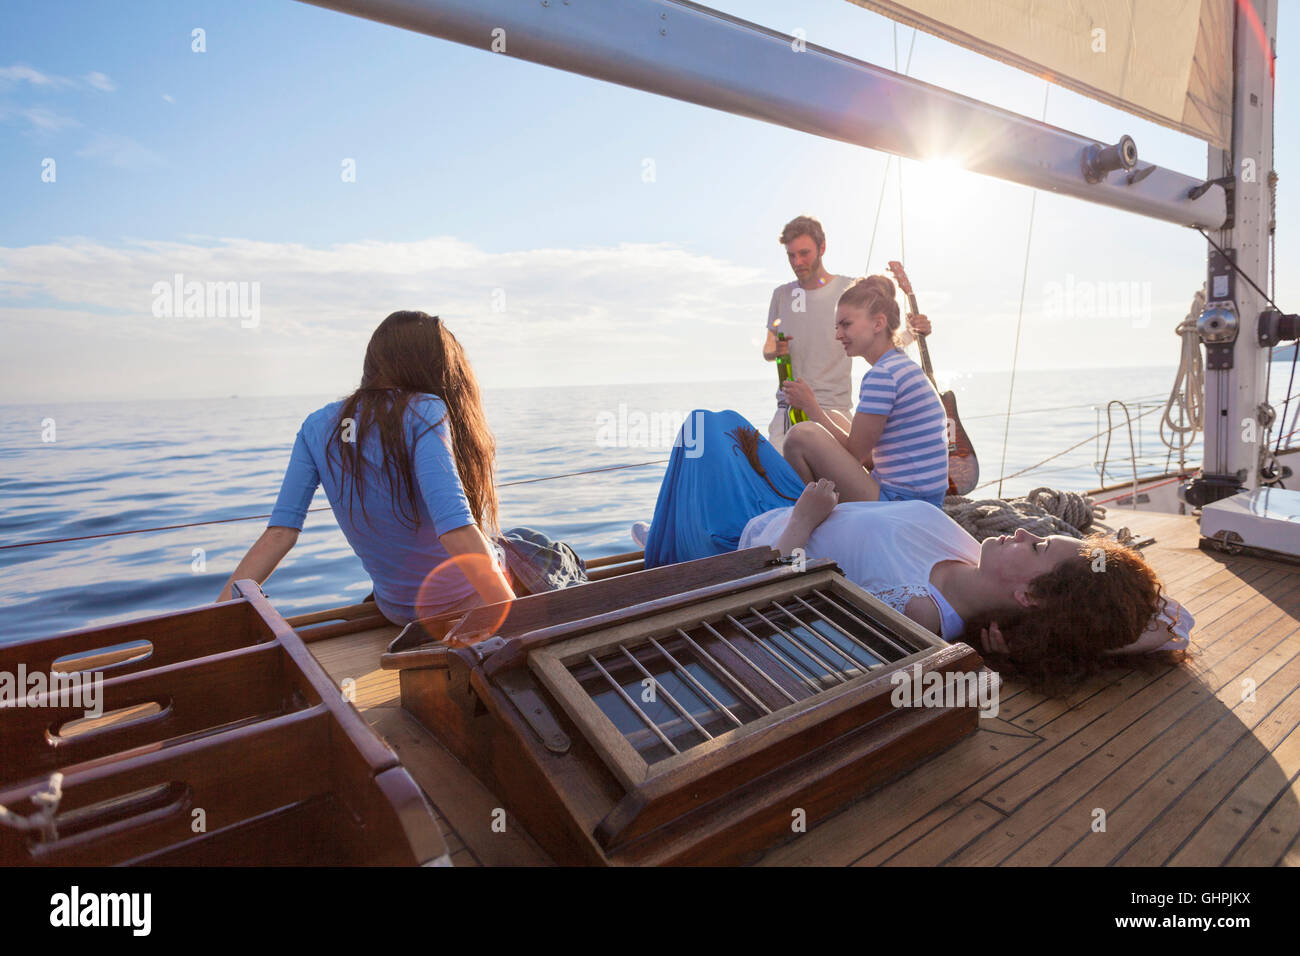 Friends relaxing on boat deck of sailboat Stock Photo